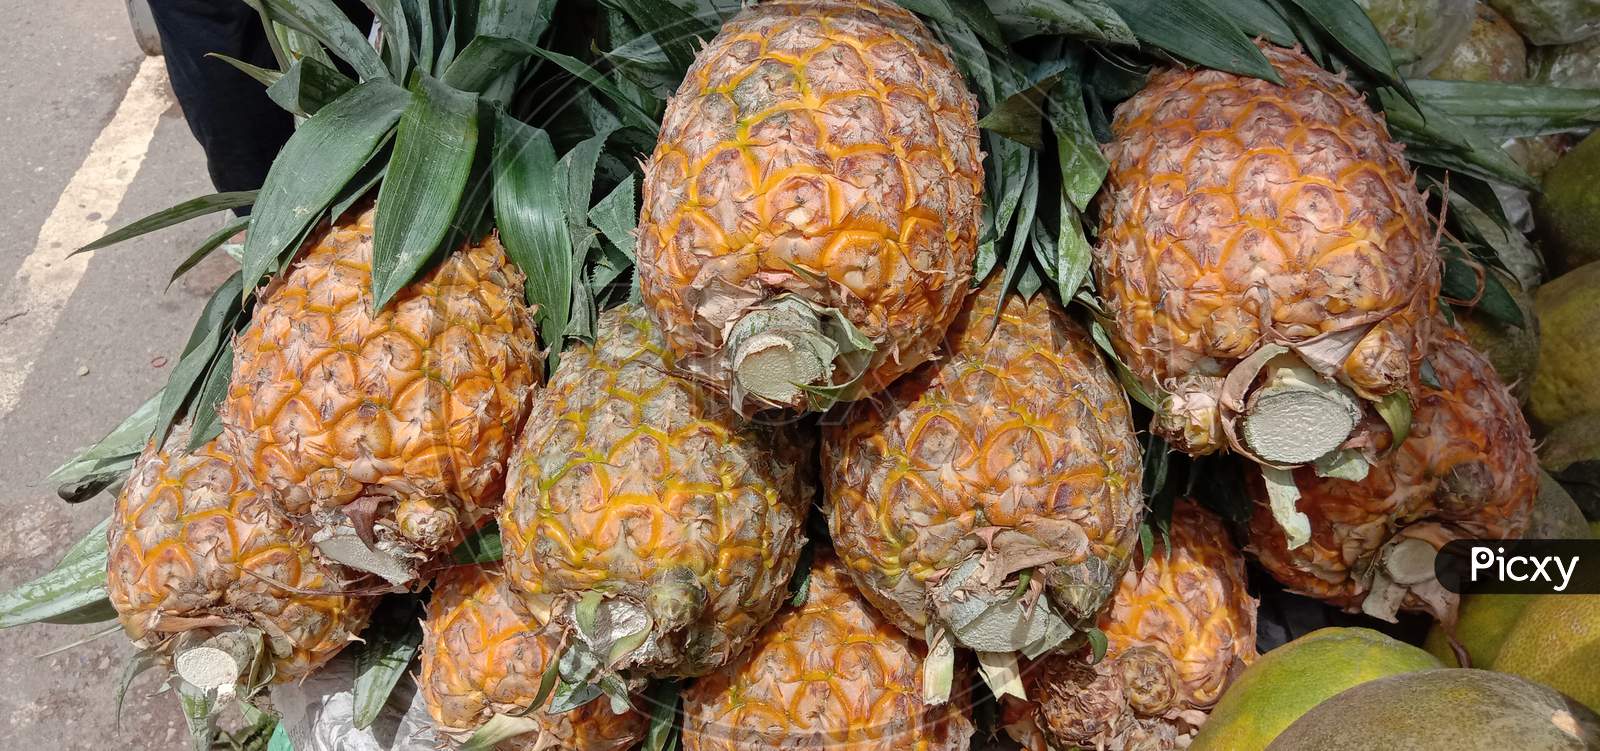 Tasty And Healthy Orange Colored Pineapple Stock